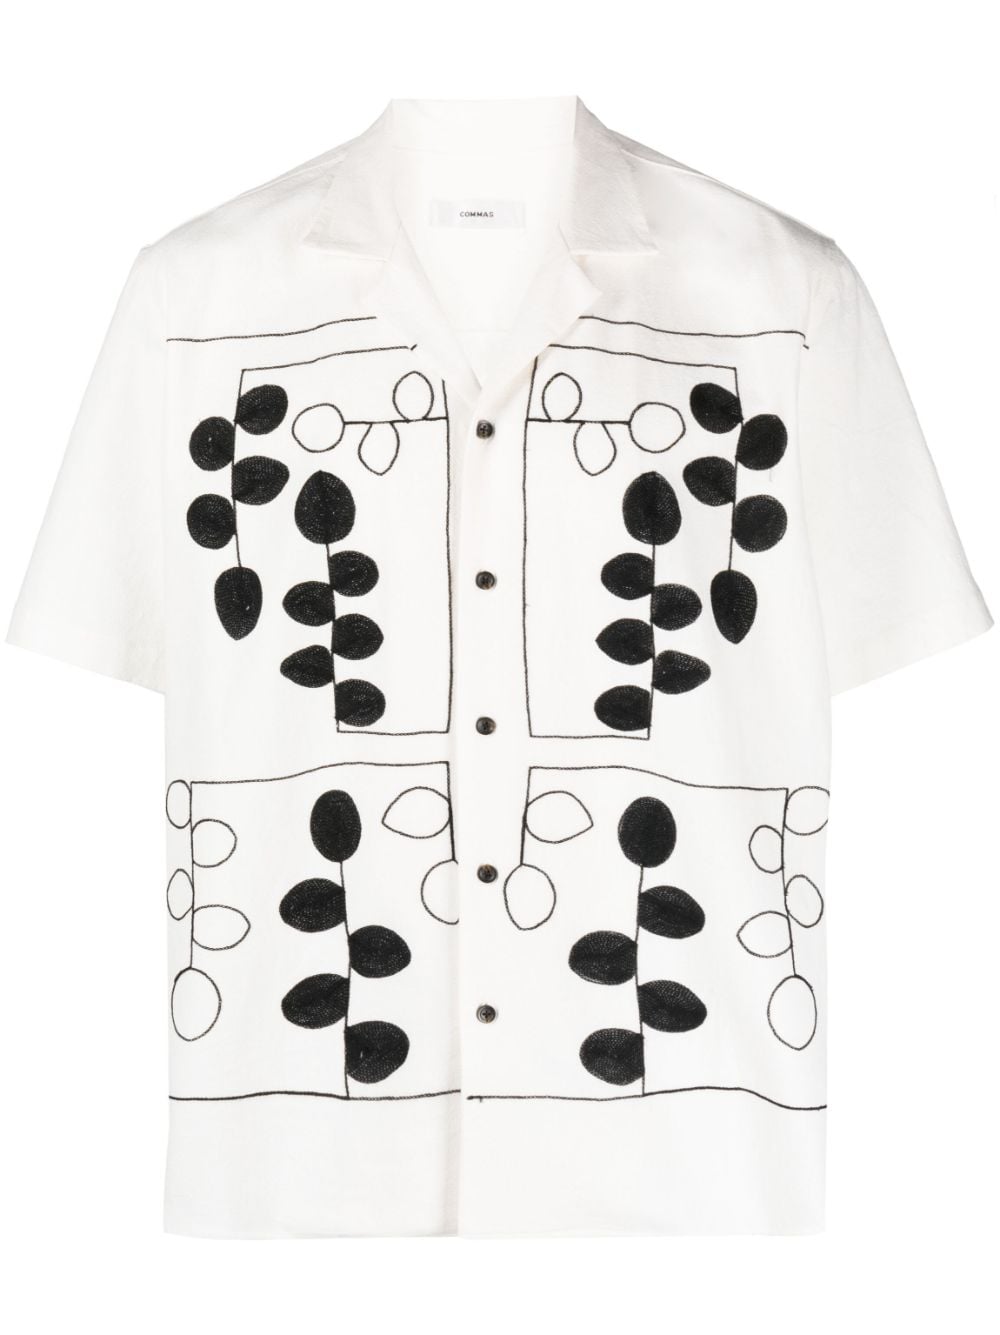 COMMAS graphic-embroidered short-sleeve shirt